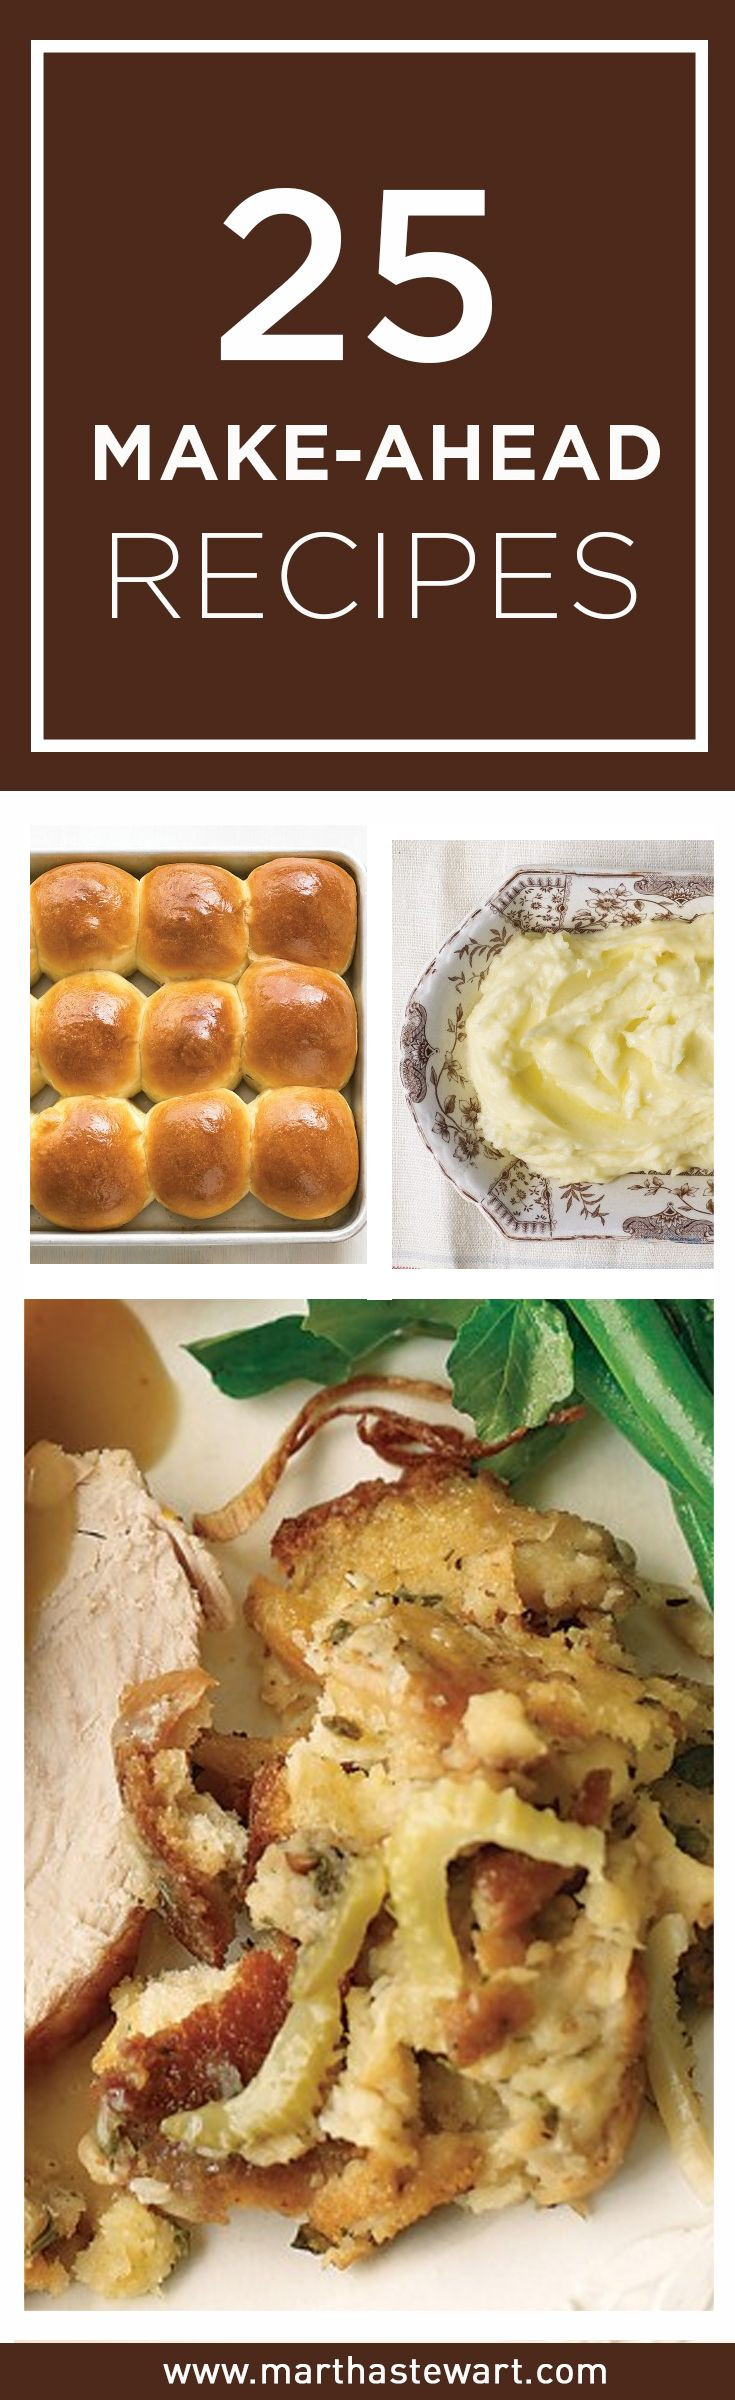 Thanksgiving Make Ahead Recipes
 17 Best images about thanksgiving on Pinterest